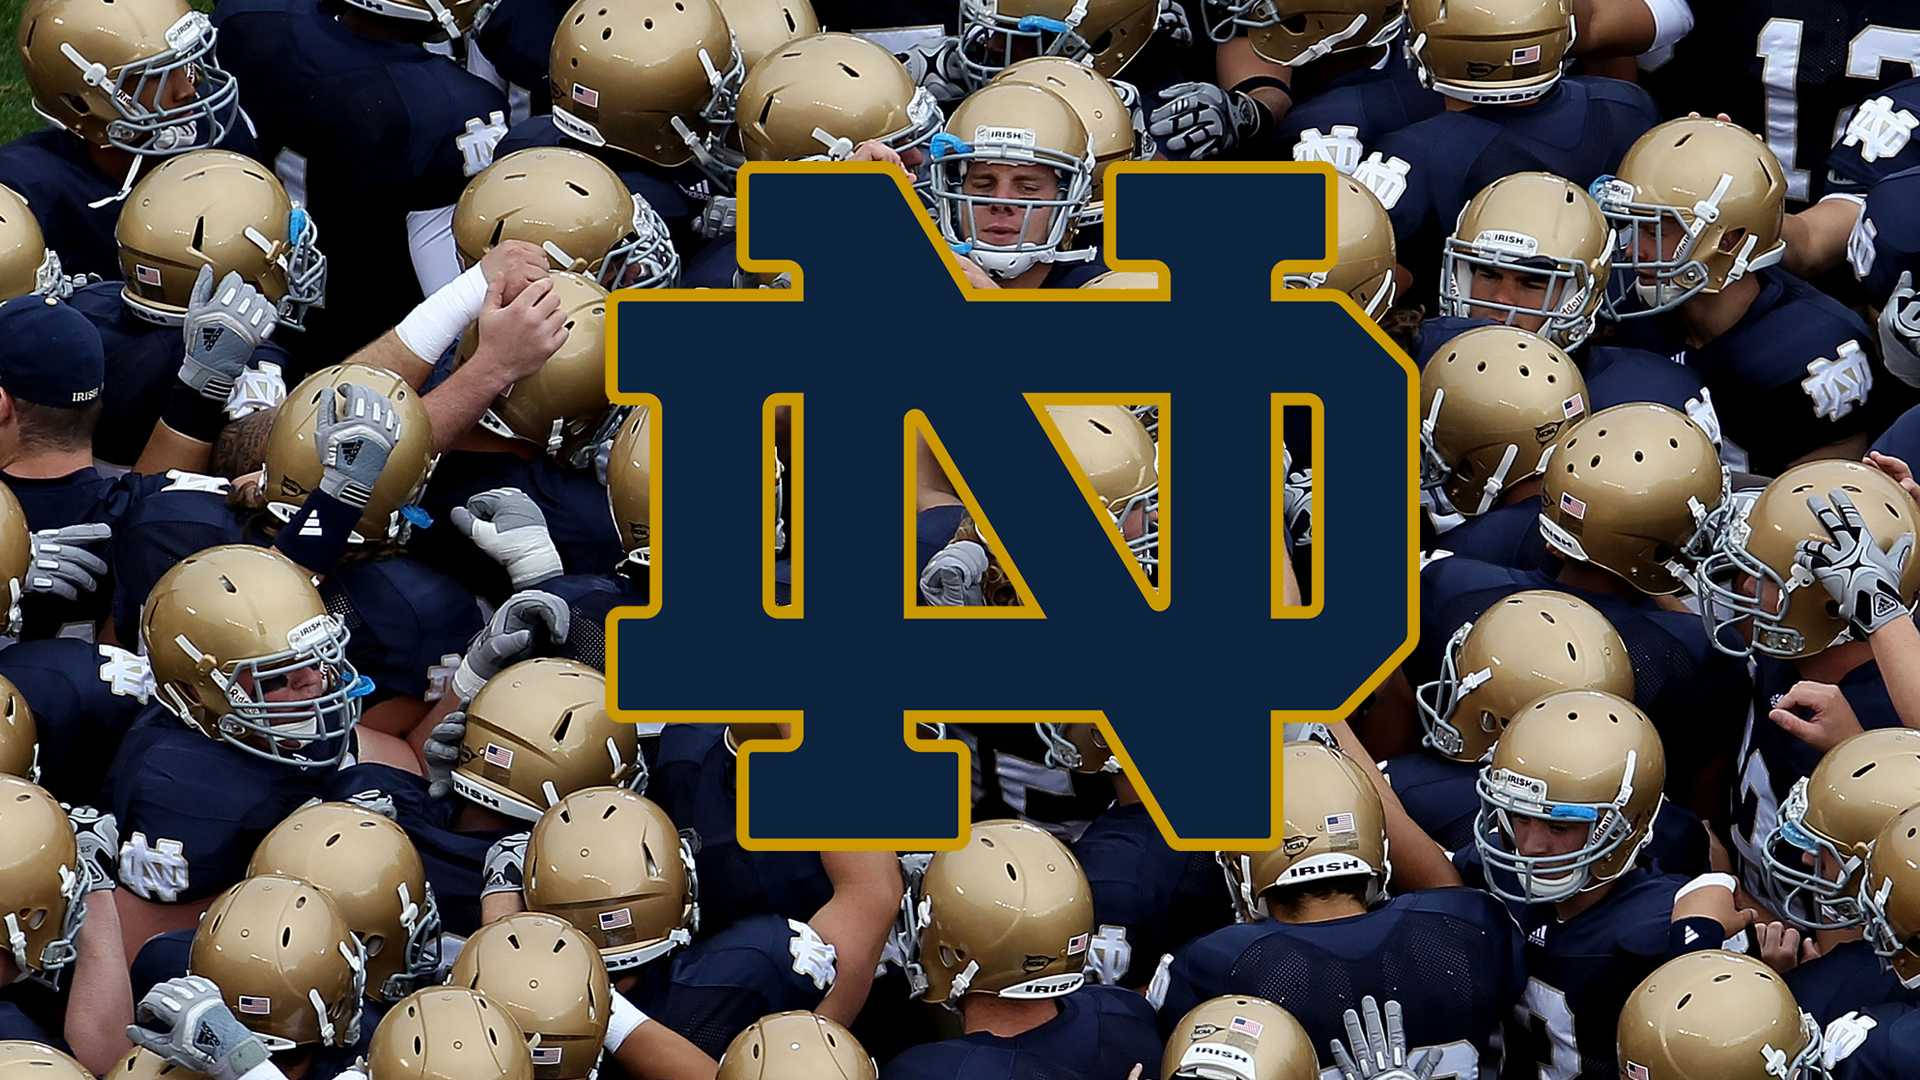 100+] Notre Dame Football Wallpapers | Wallpapers.com